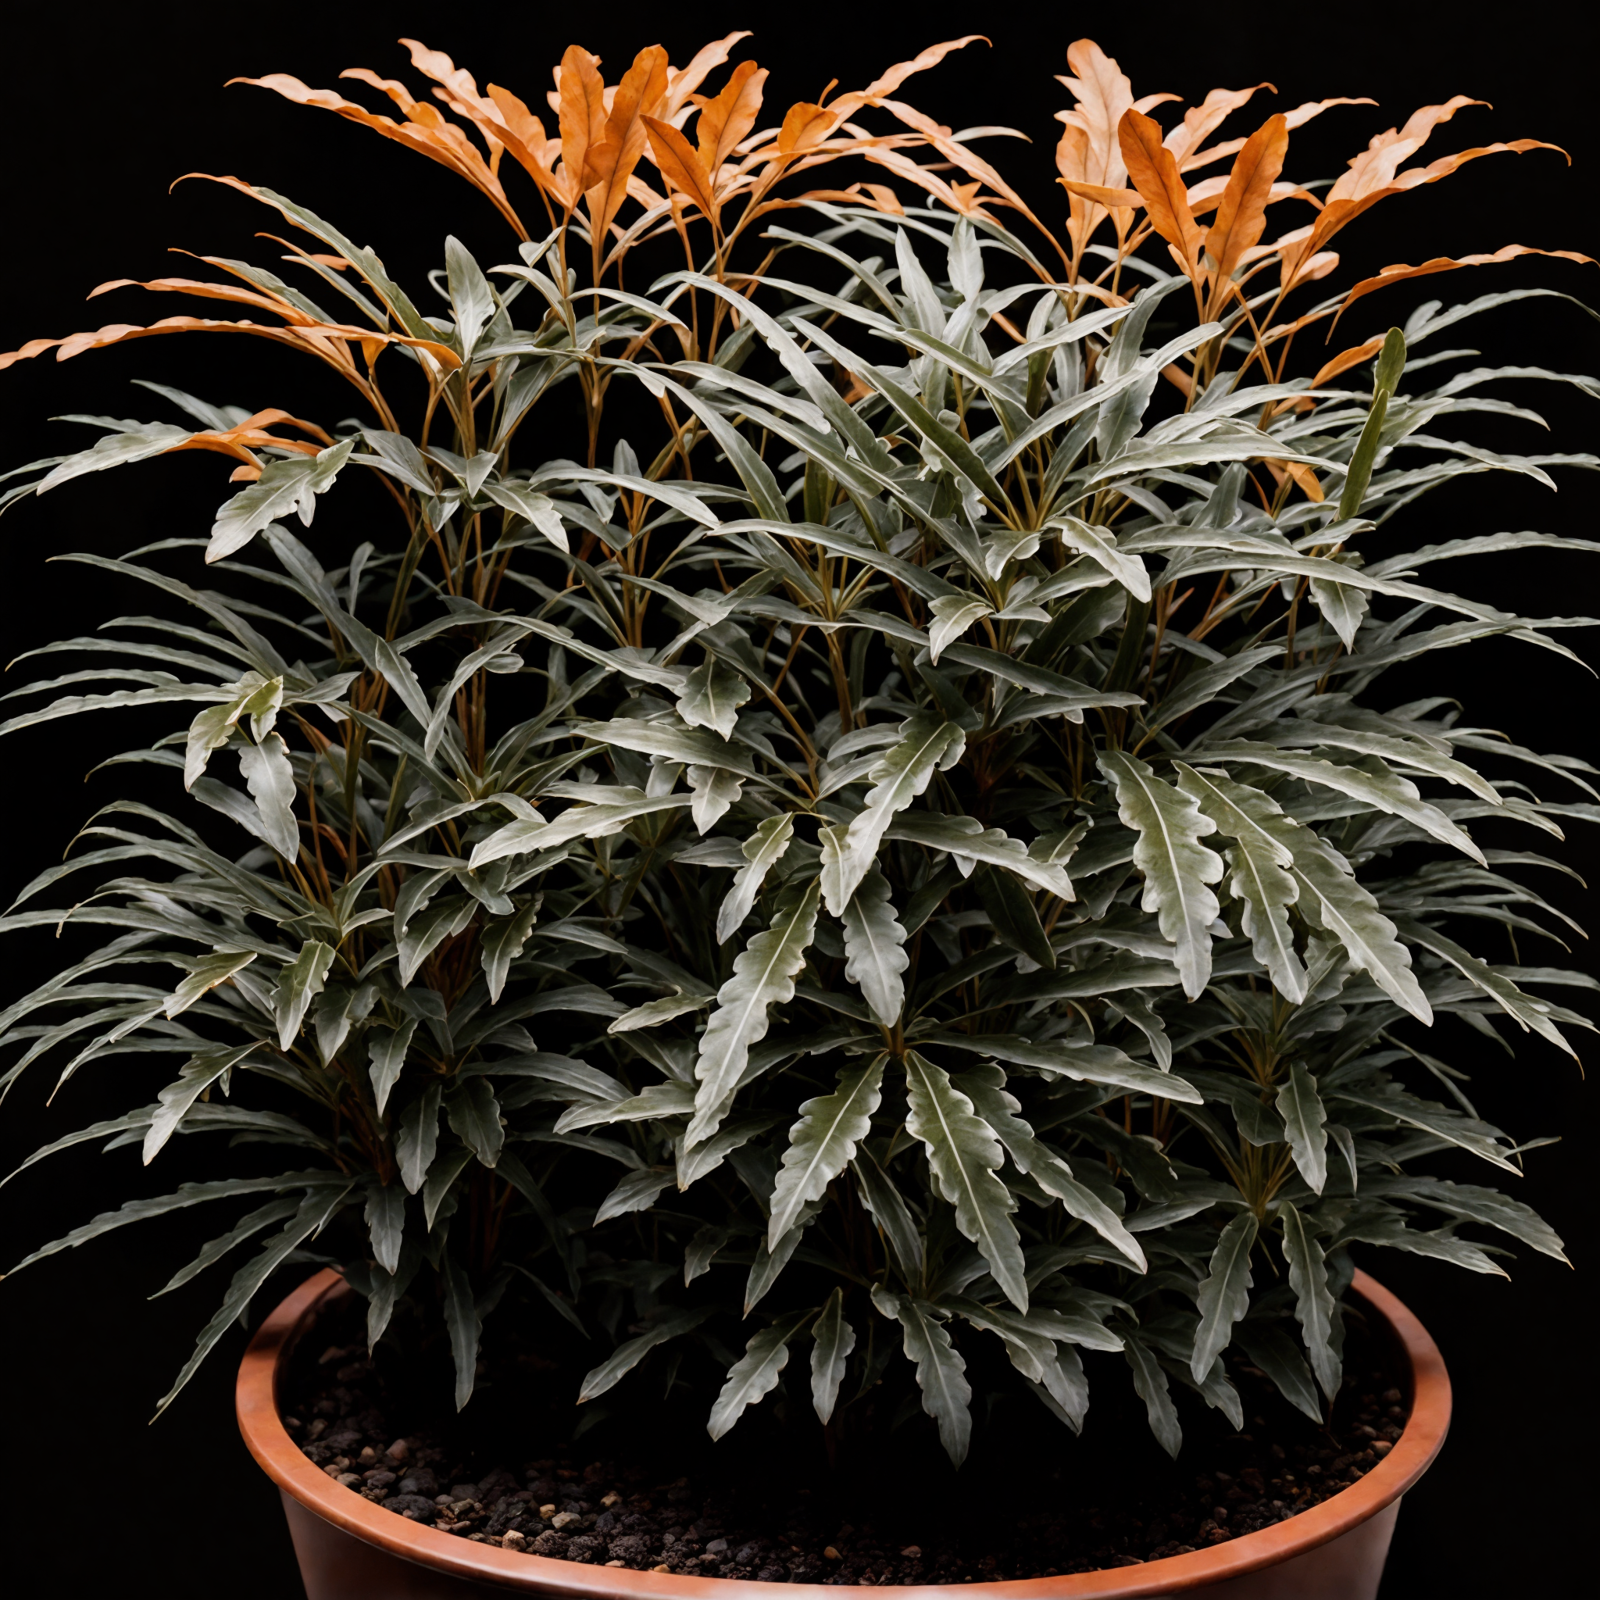 Plerandra elegantissima in a brown planter, with its lush leaves against a dark backdrop, well-lit and hyper-realistic.